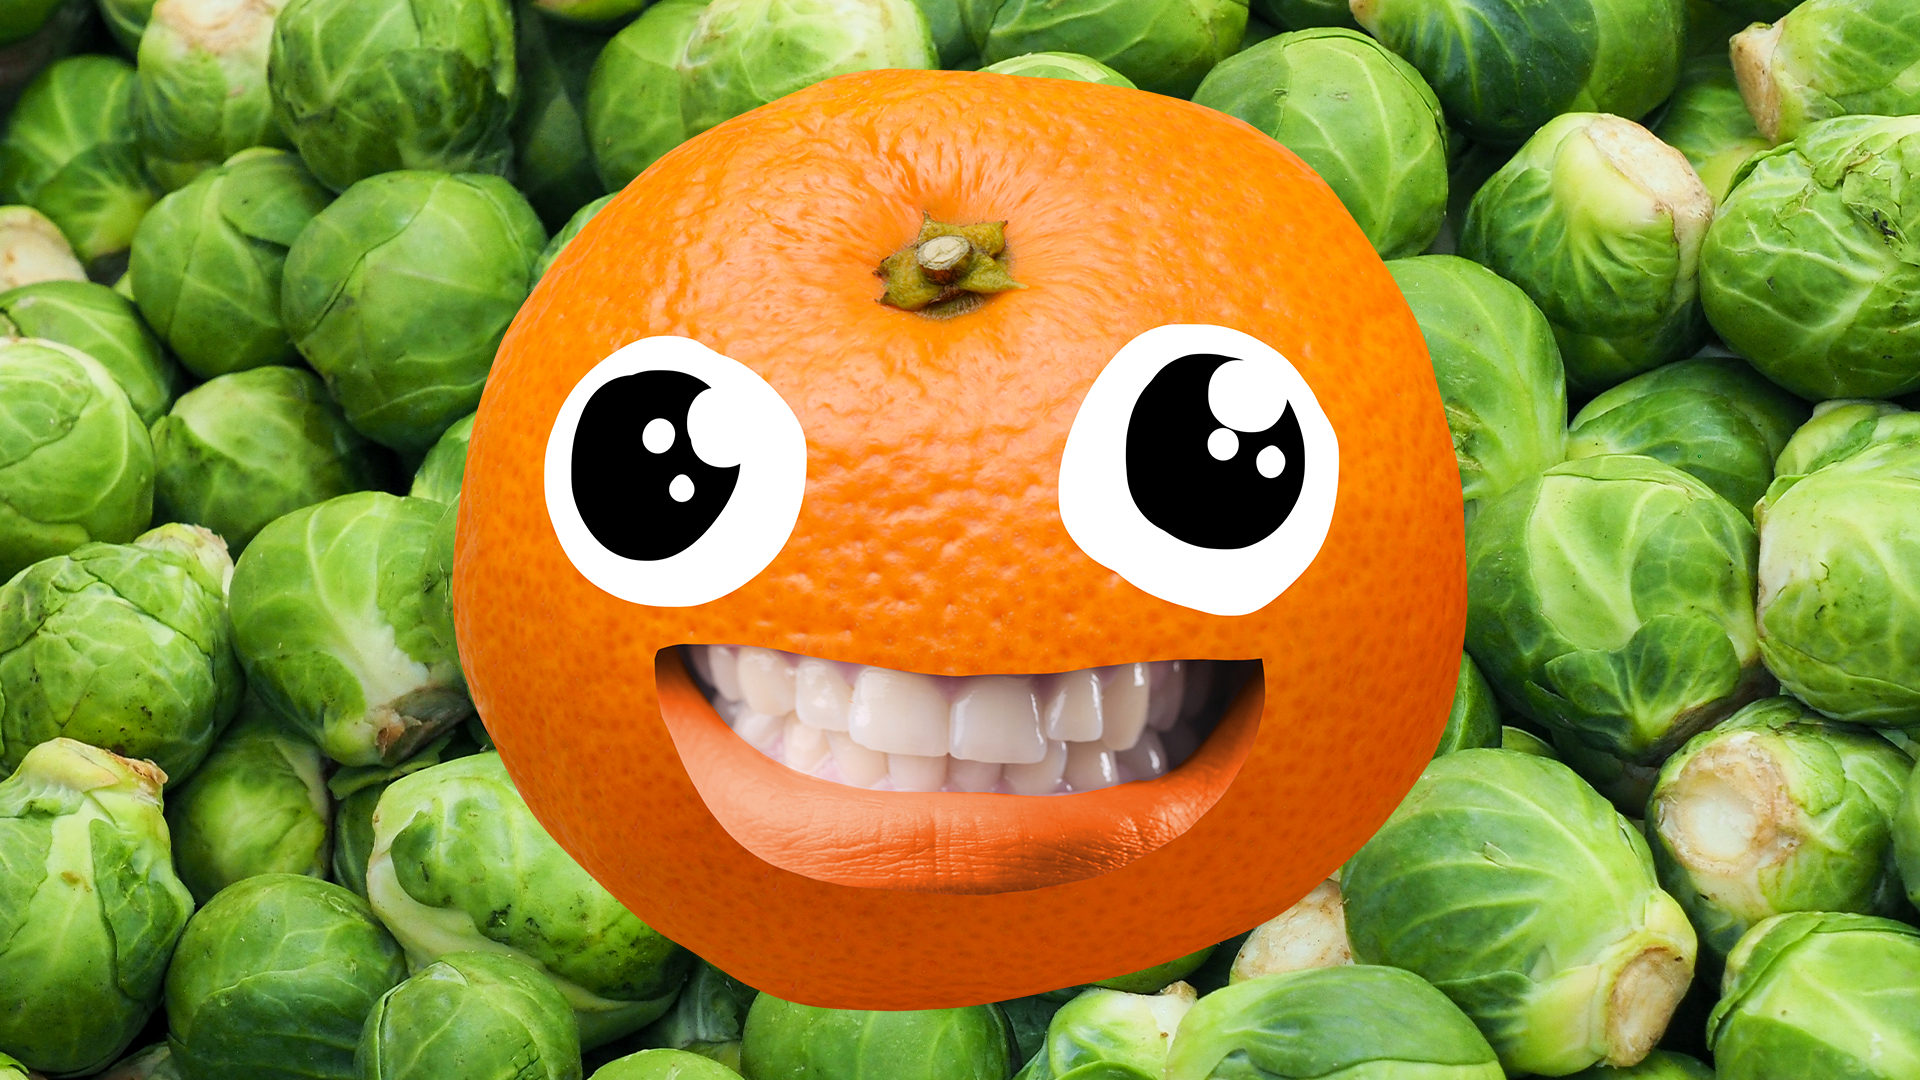 Grinning satsuma on Brussel sprout background